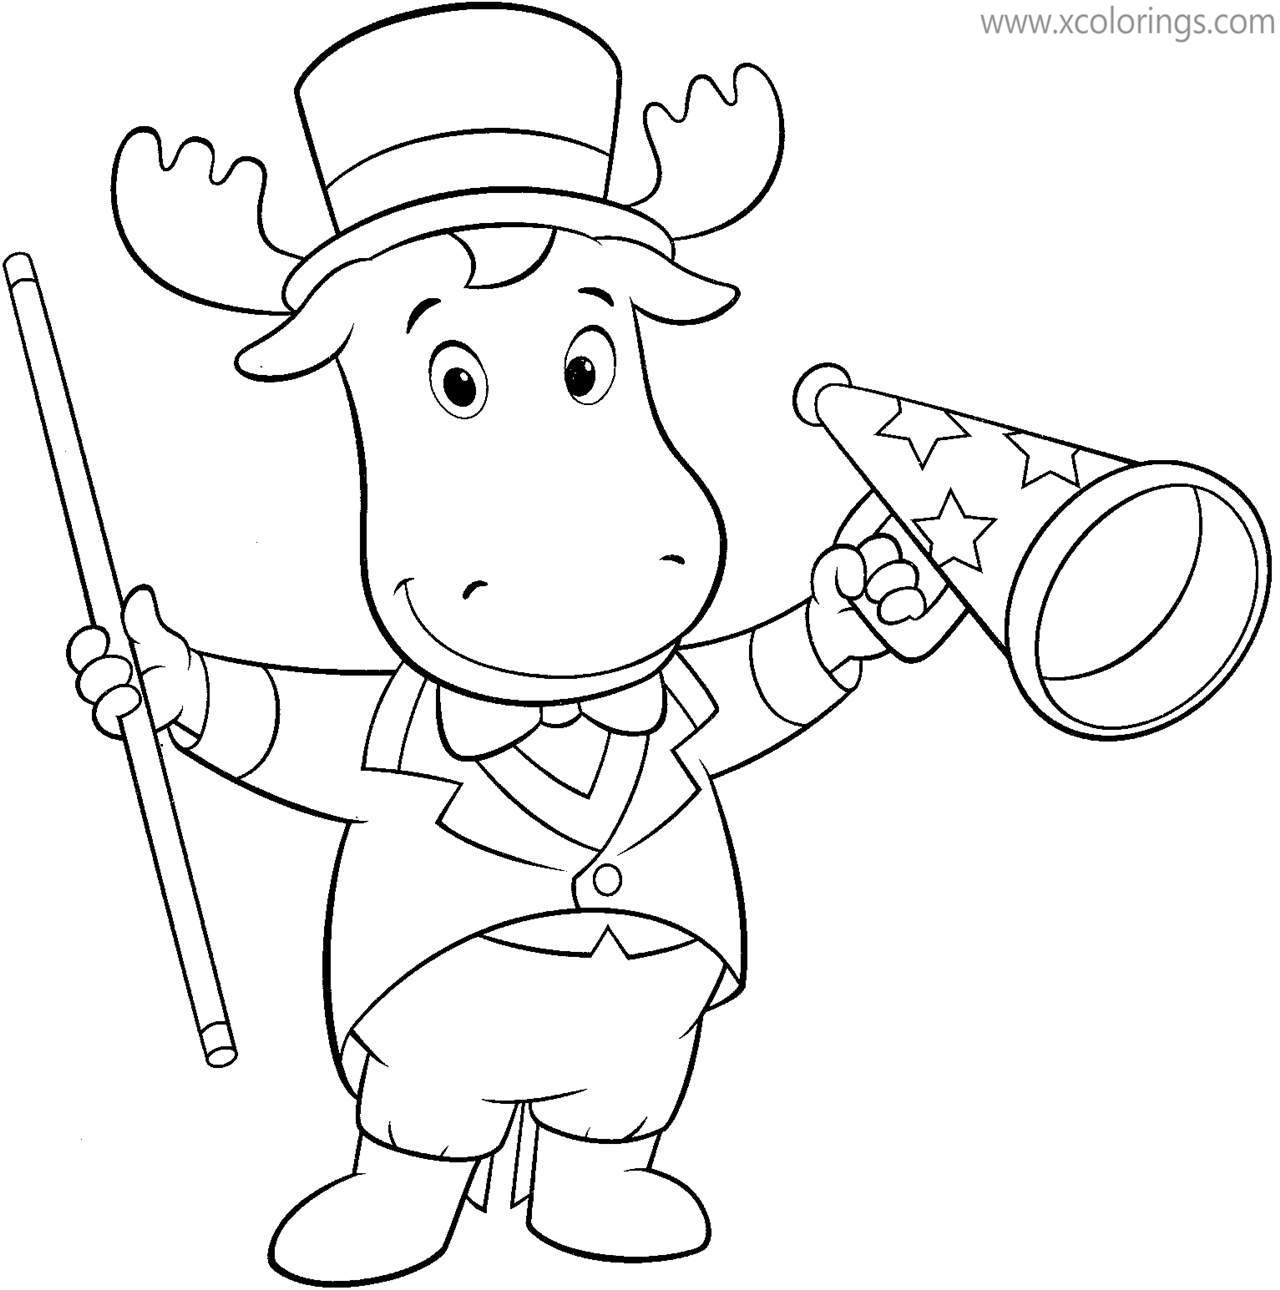 Backyardigans Character Tyrone Coloring Pages Xcolorings The Best Porn Website